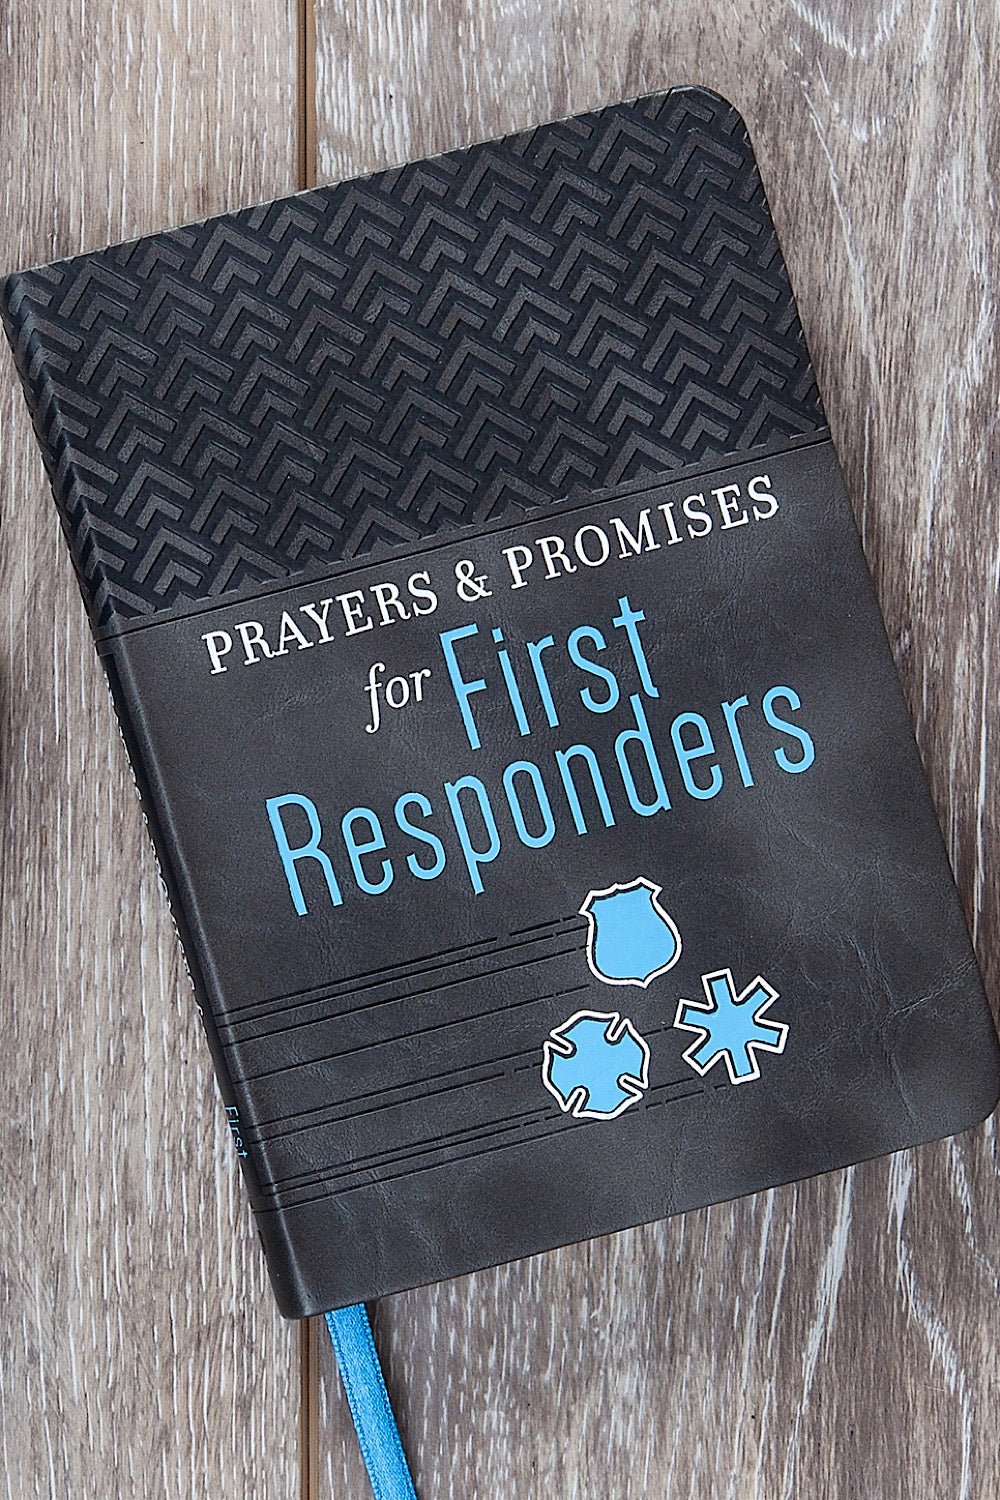 PRAYERS & PROMISES FOR FIRST RESPONDERS